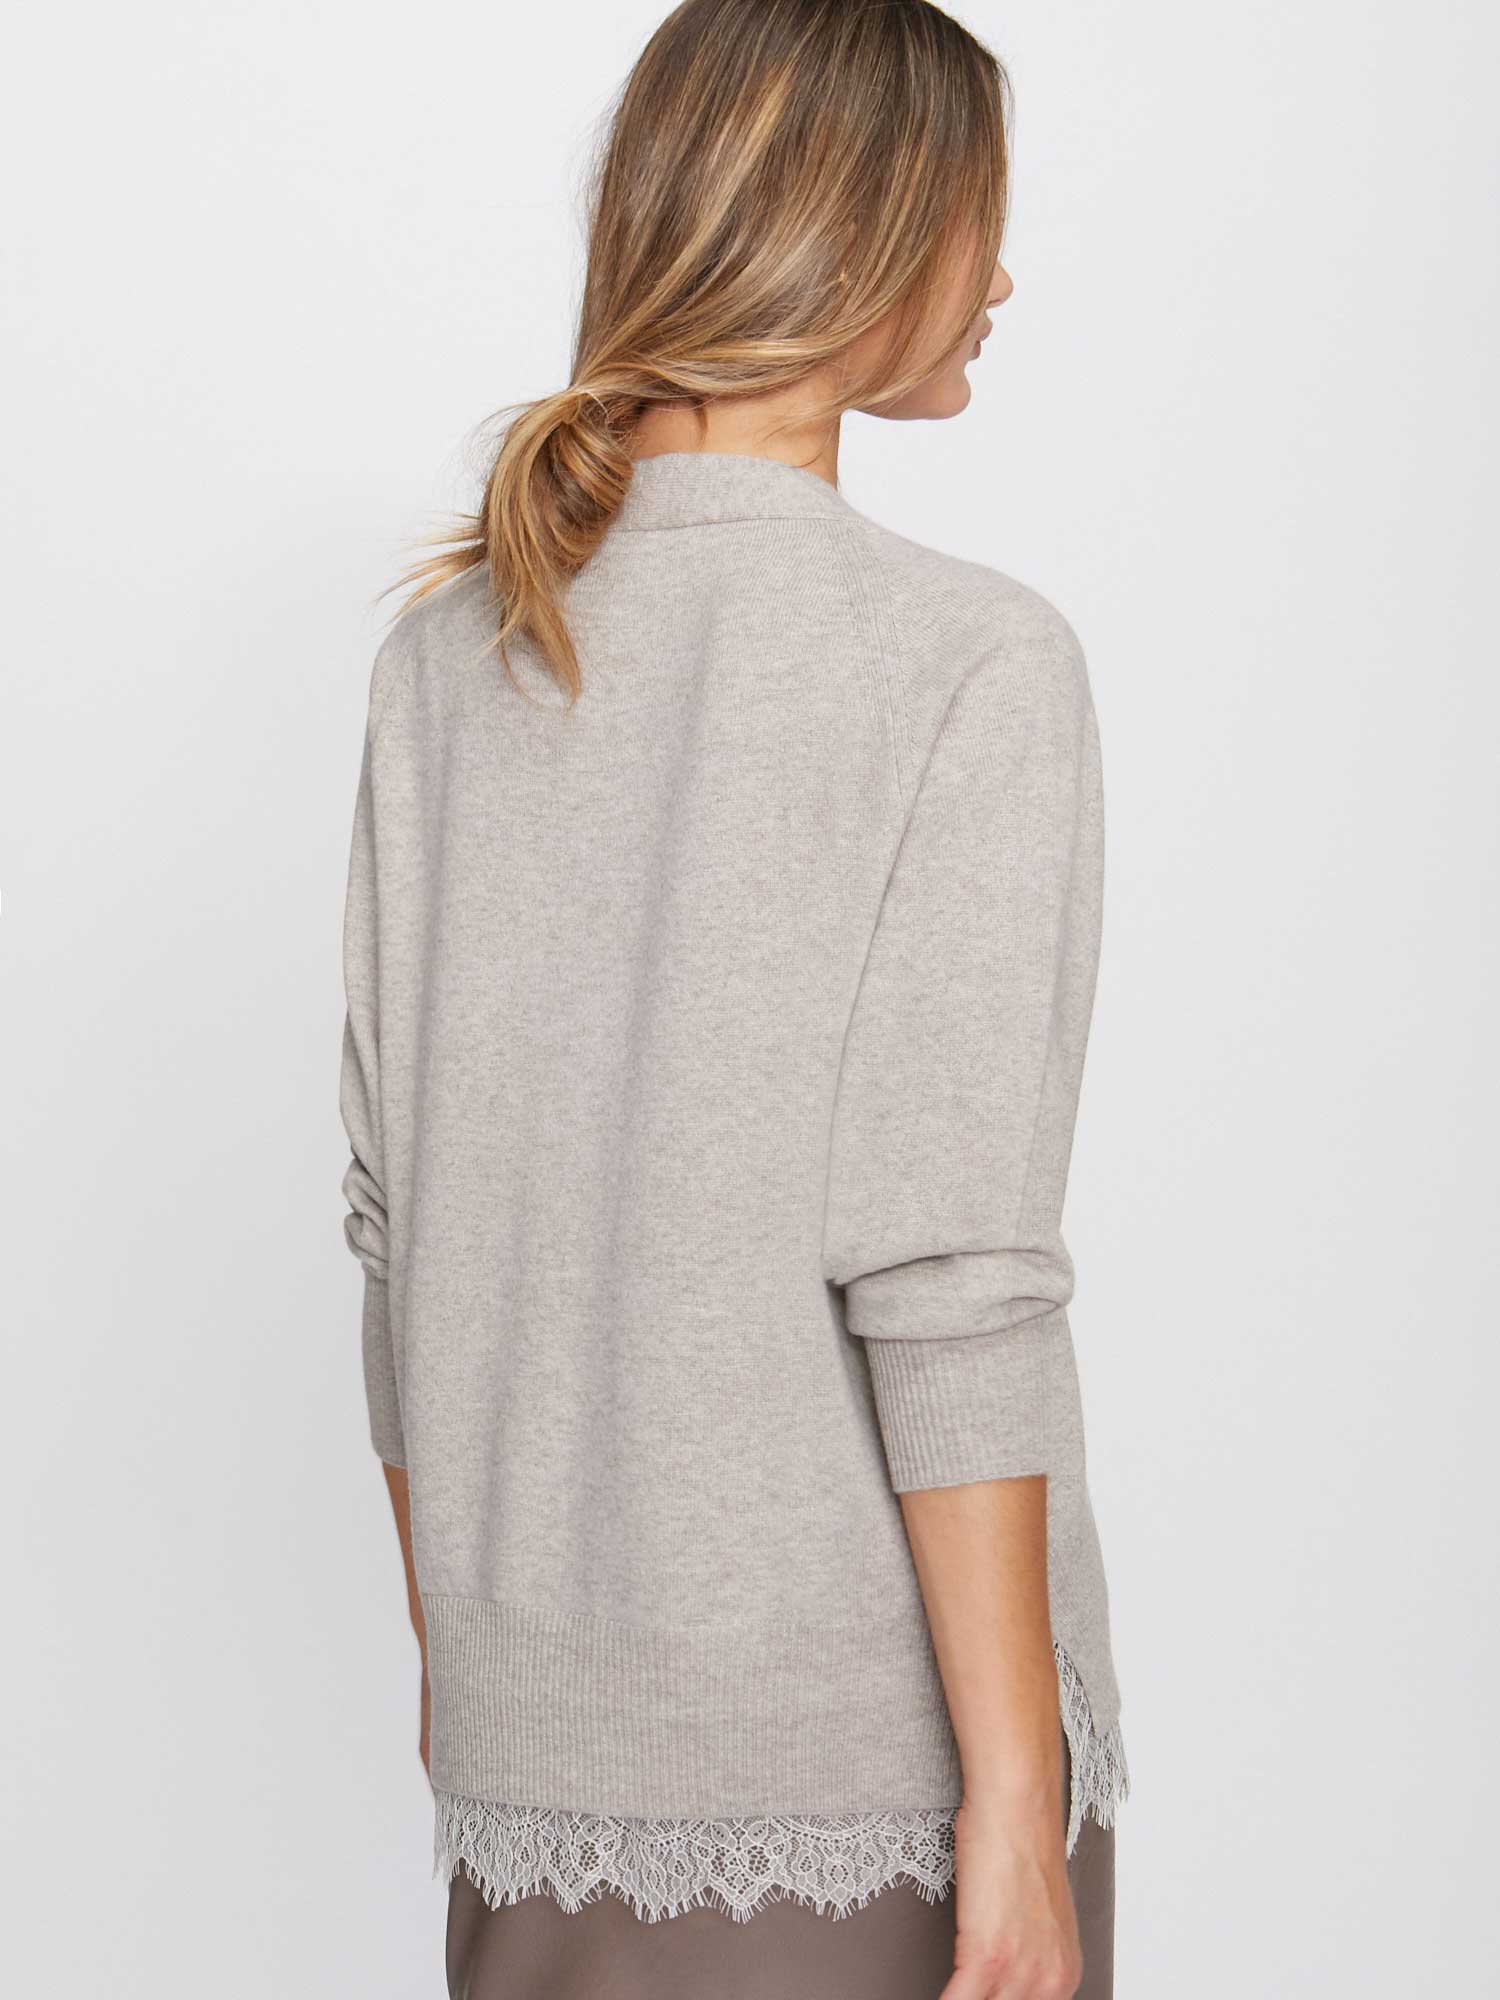 Light grey lace layered v-neck sweater back view